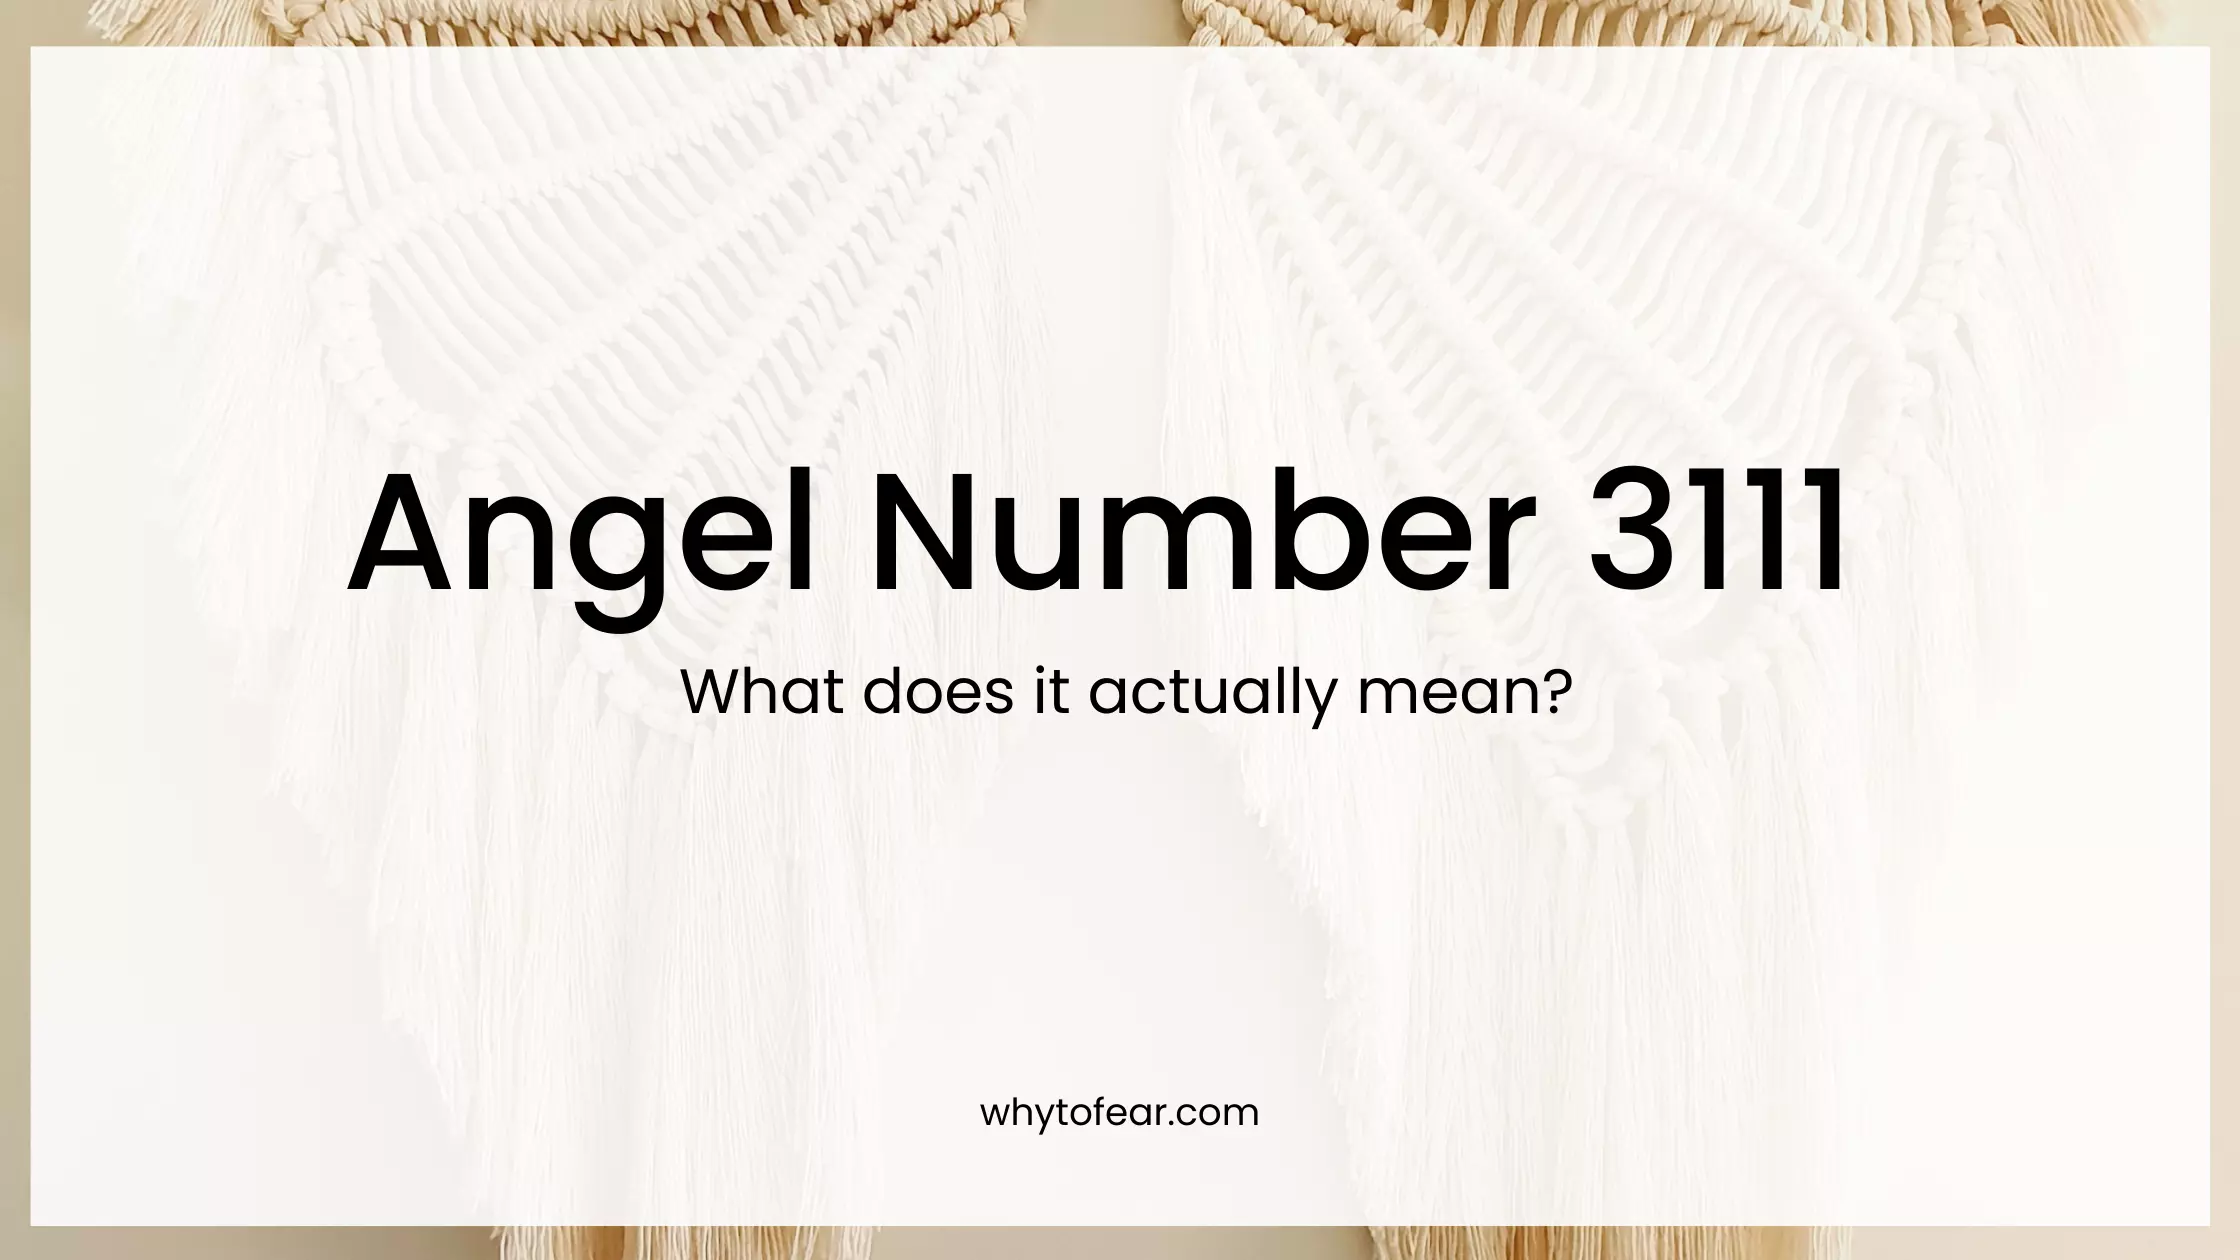 3111 angel number: What is the purpose?